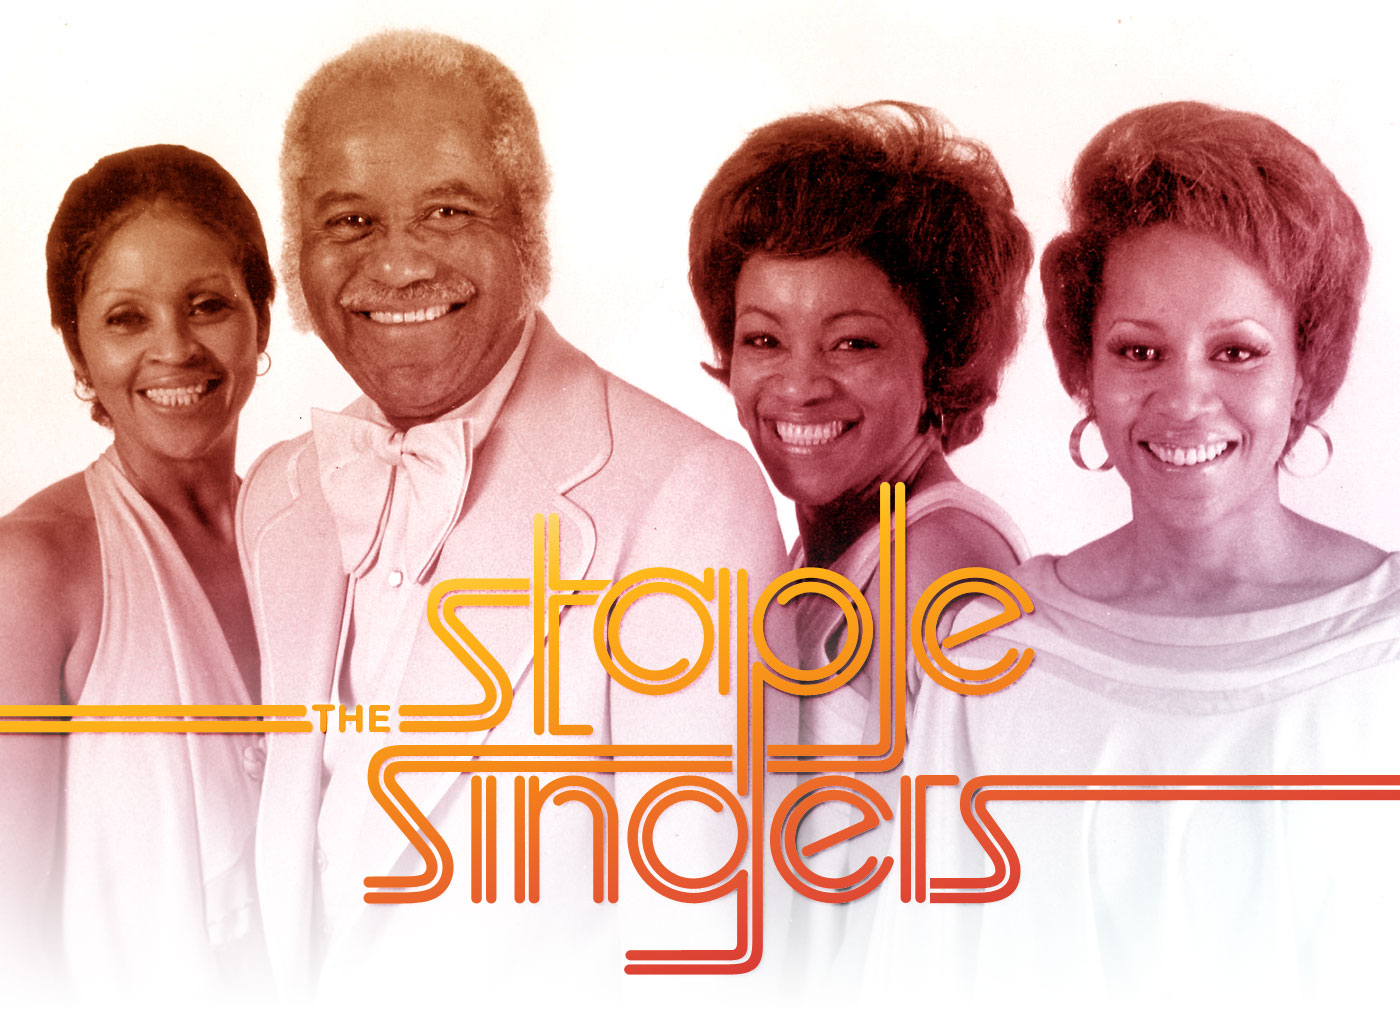 15-facts-about-staple-singers